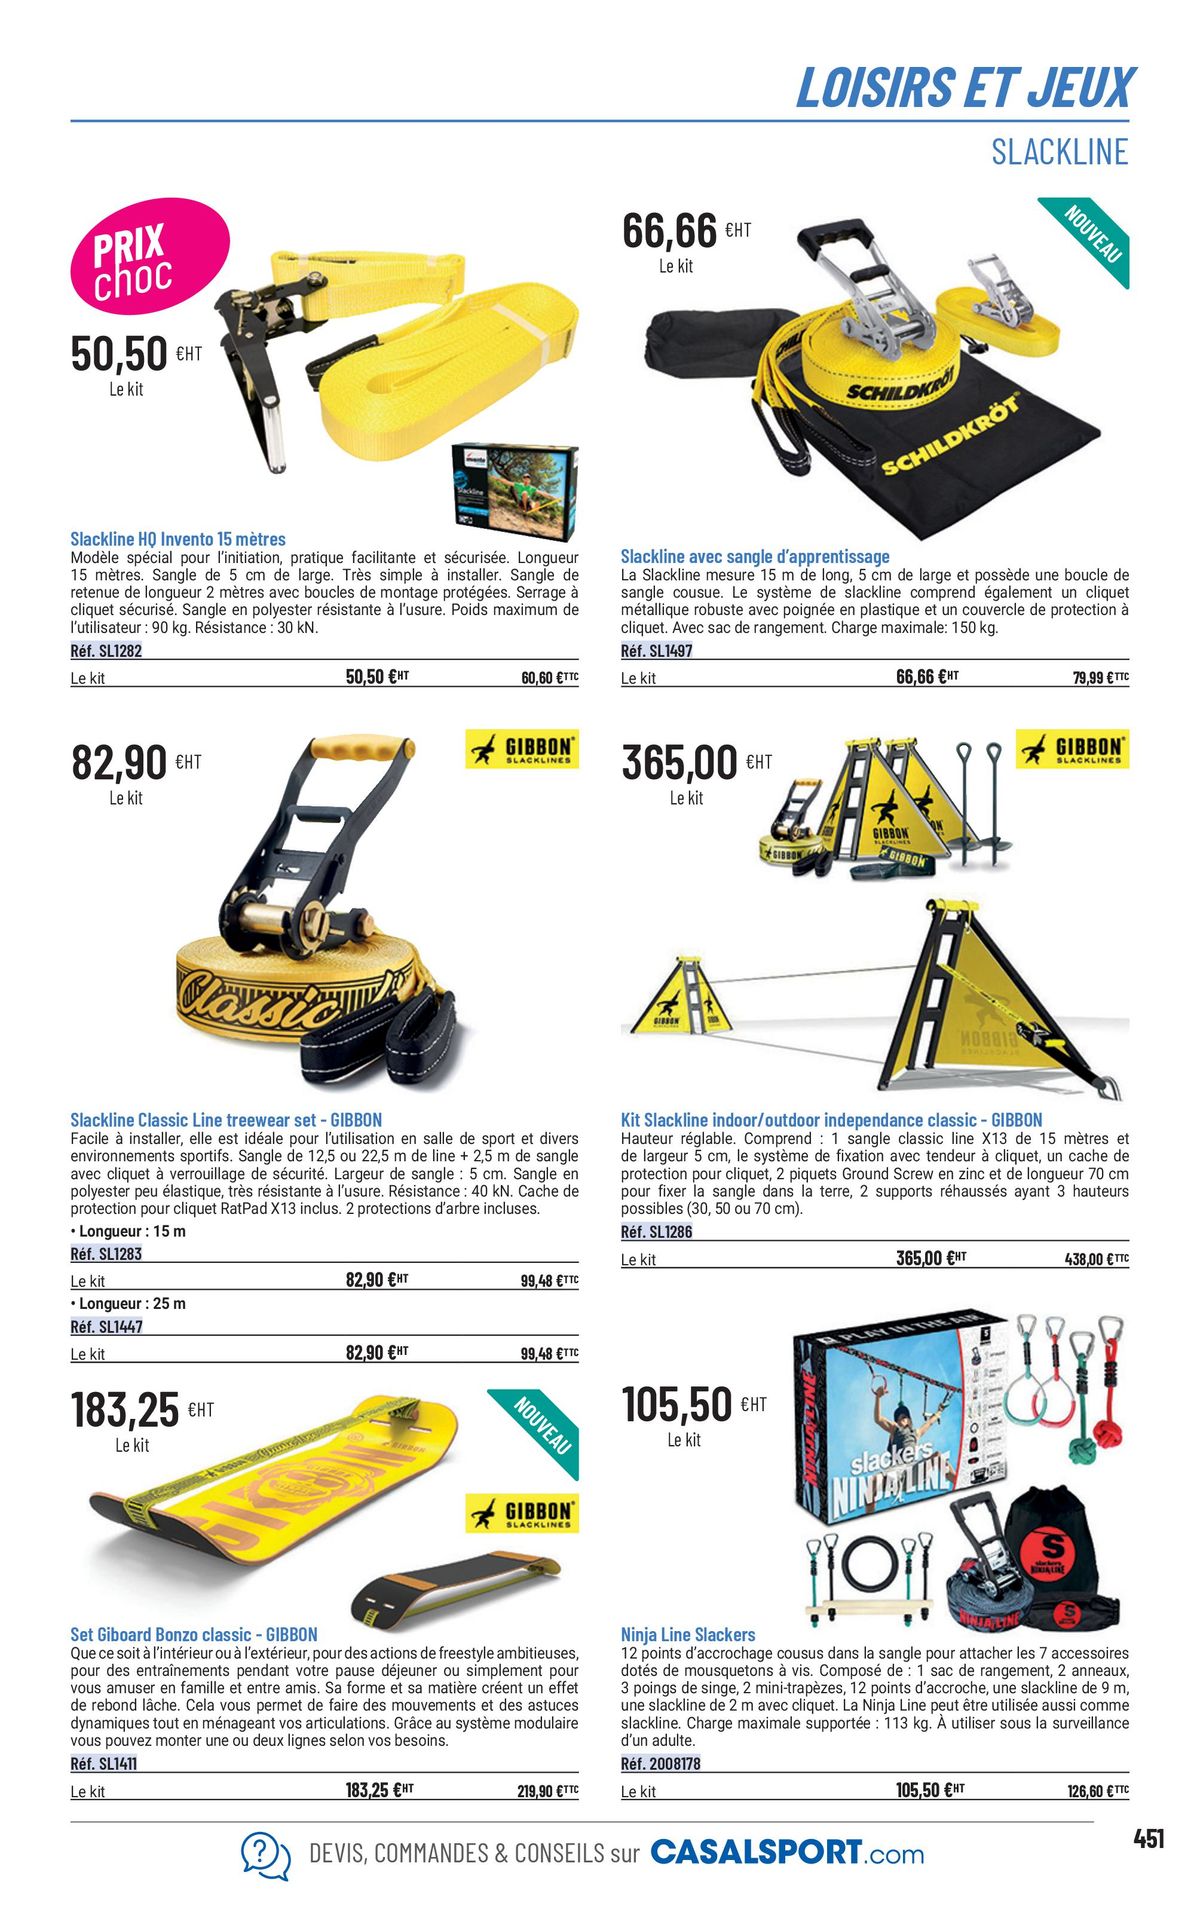 Catalogue Equipement sportif, page 00423